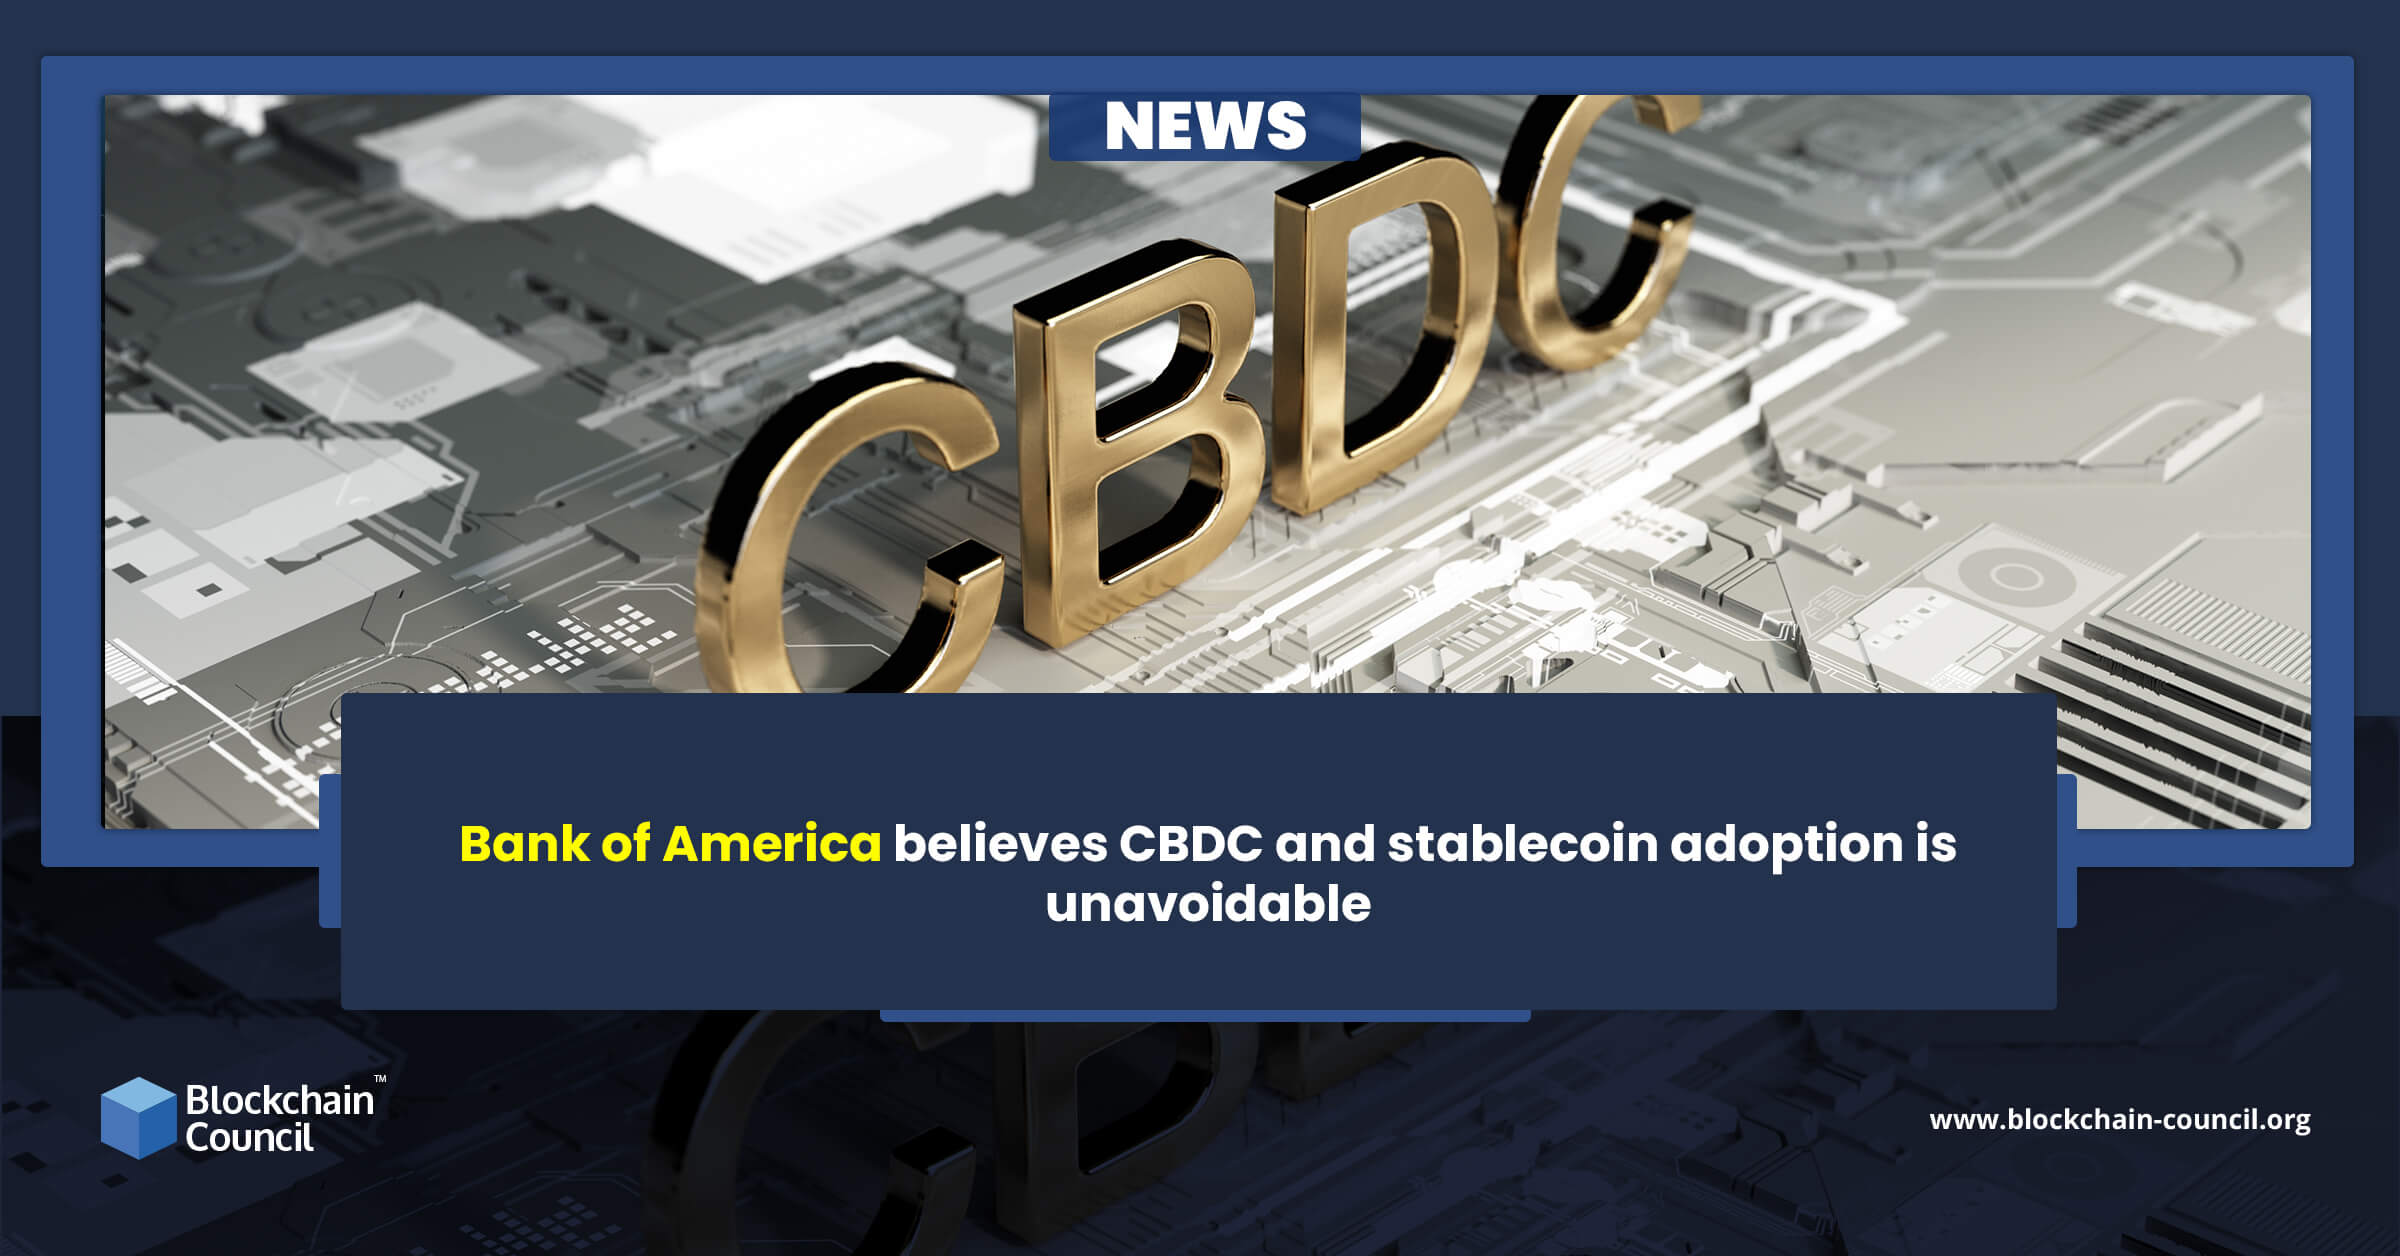 Bank of America believes CBDC and stablecoin adoption is unavoidable